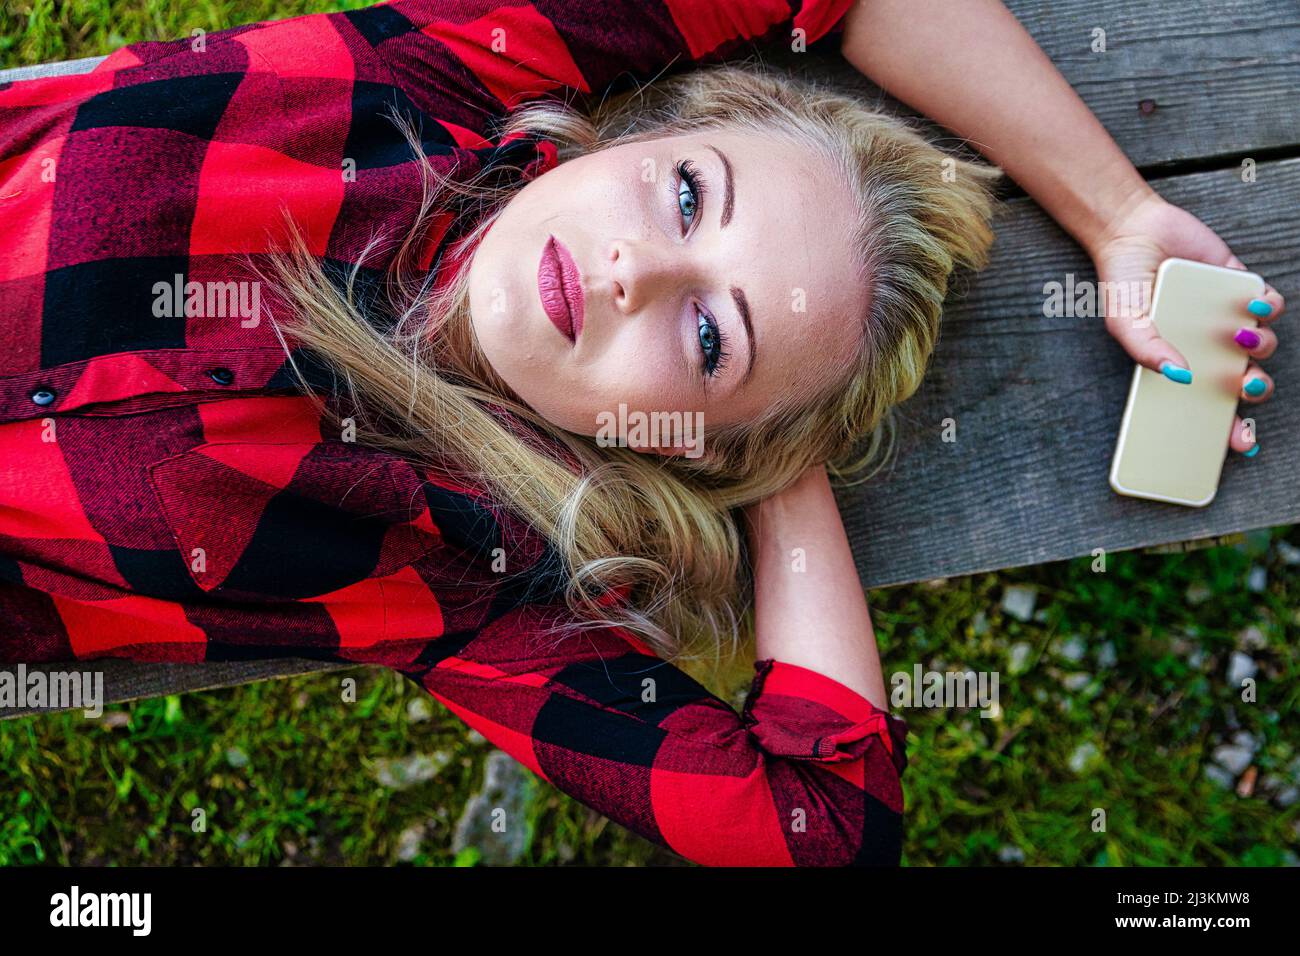 Pensive young blond woman with gorgeous blue eyes lying stretched out on a park bench looking up at the camera with a quiet calm expression Stock Photo